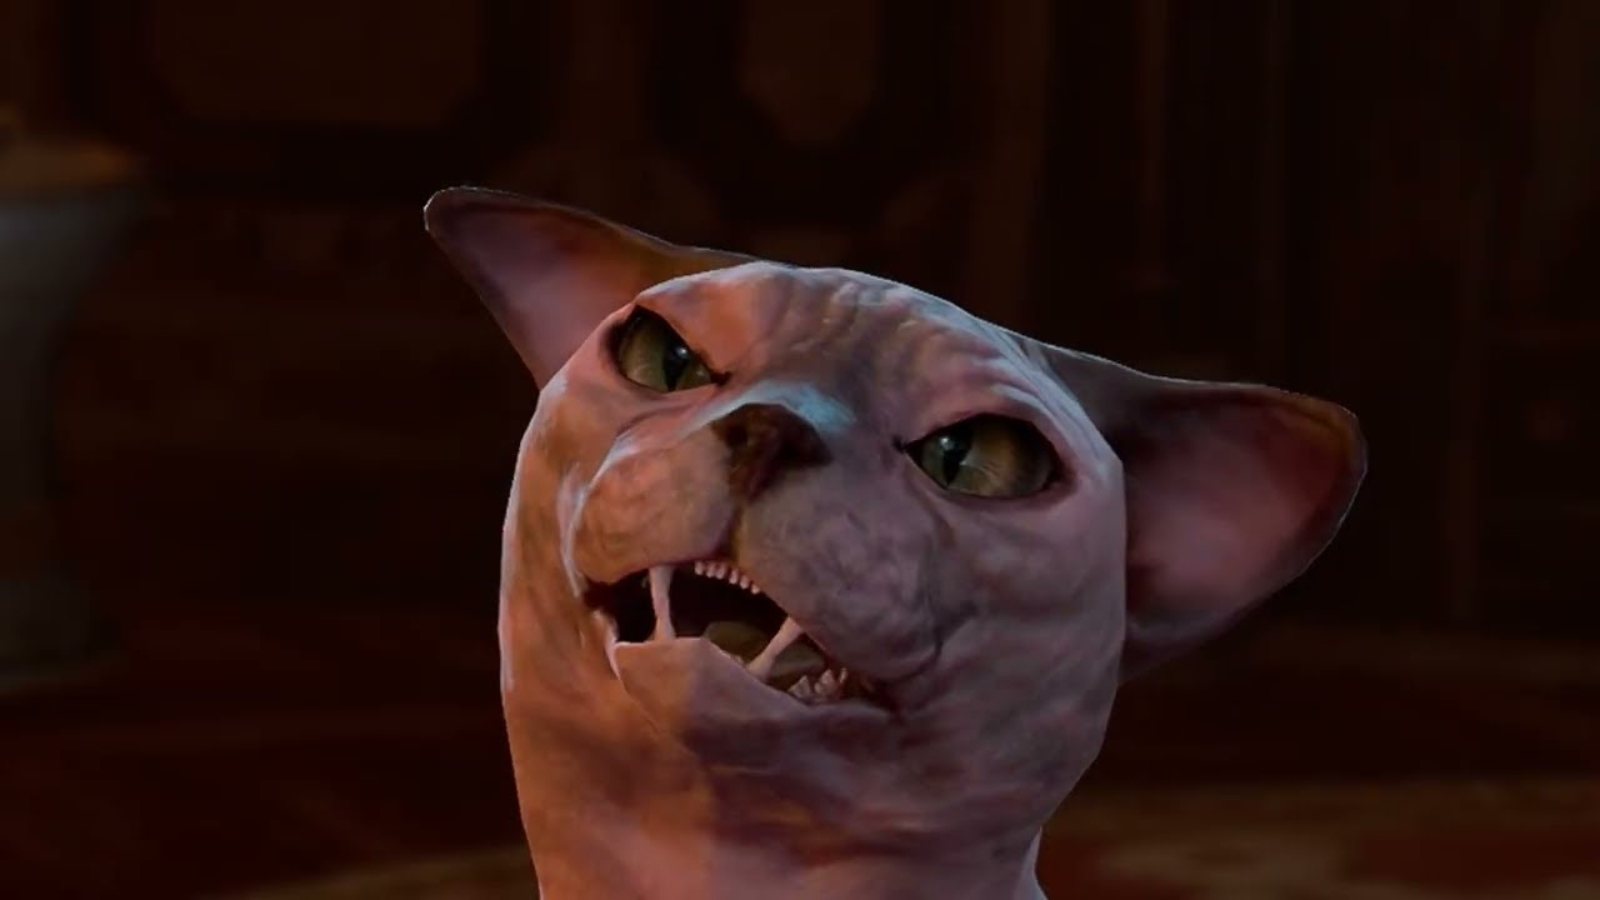 Baldur’s Gate 3’s Honor Mode launch goes hilariously wrong after the player tries to feed the cat